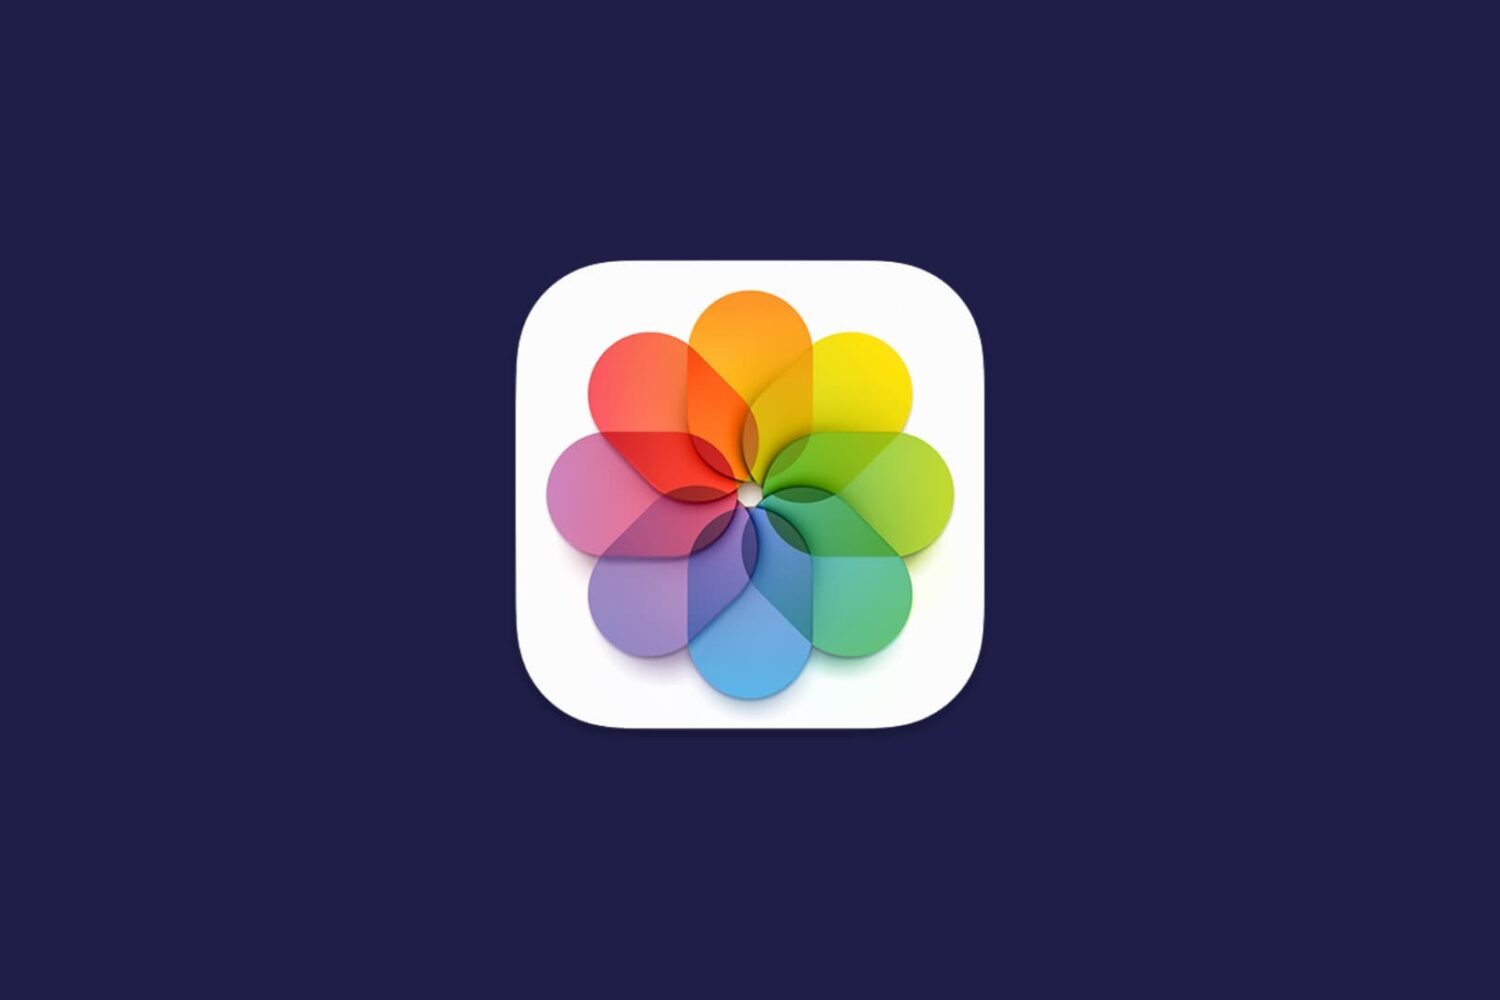 Apple Photos app icon on a solid blue background